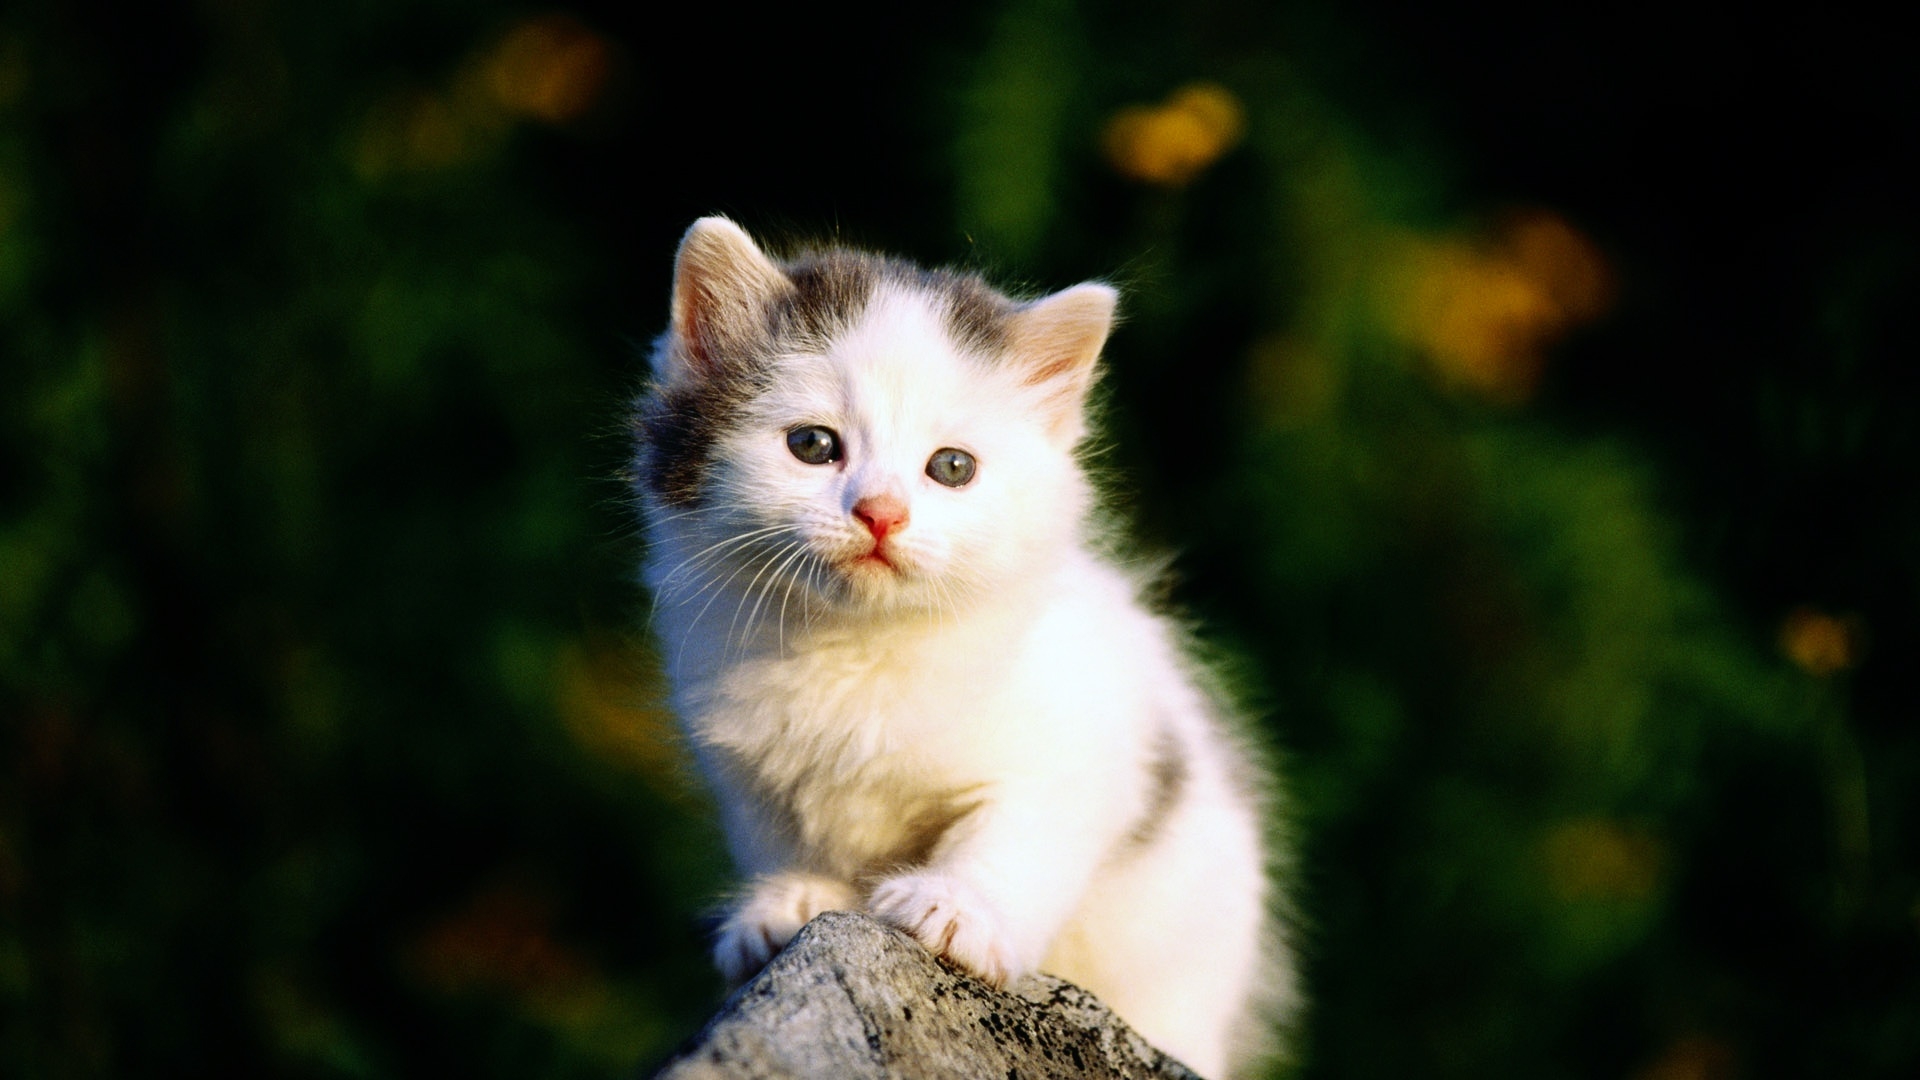 And Sweet Cat Wallpaper Are Waiting For Your To Into Desktop